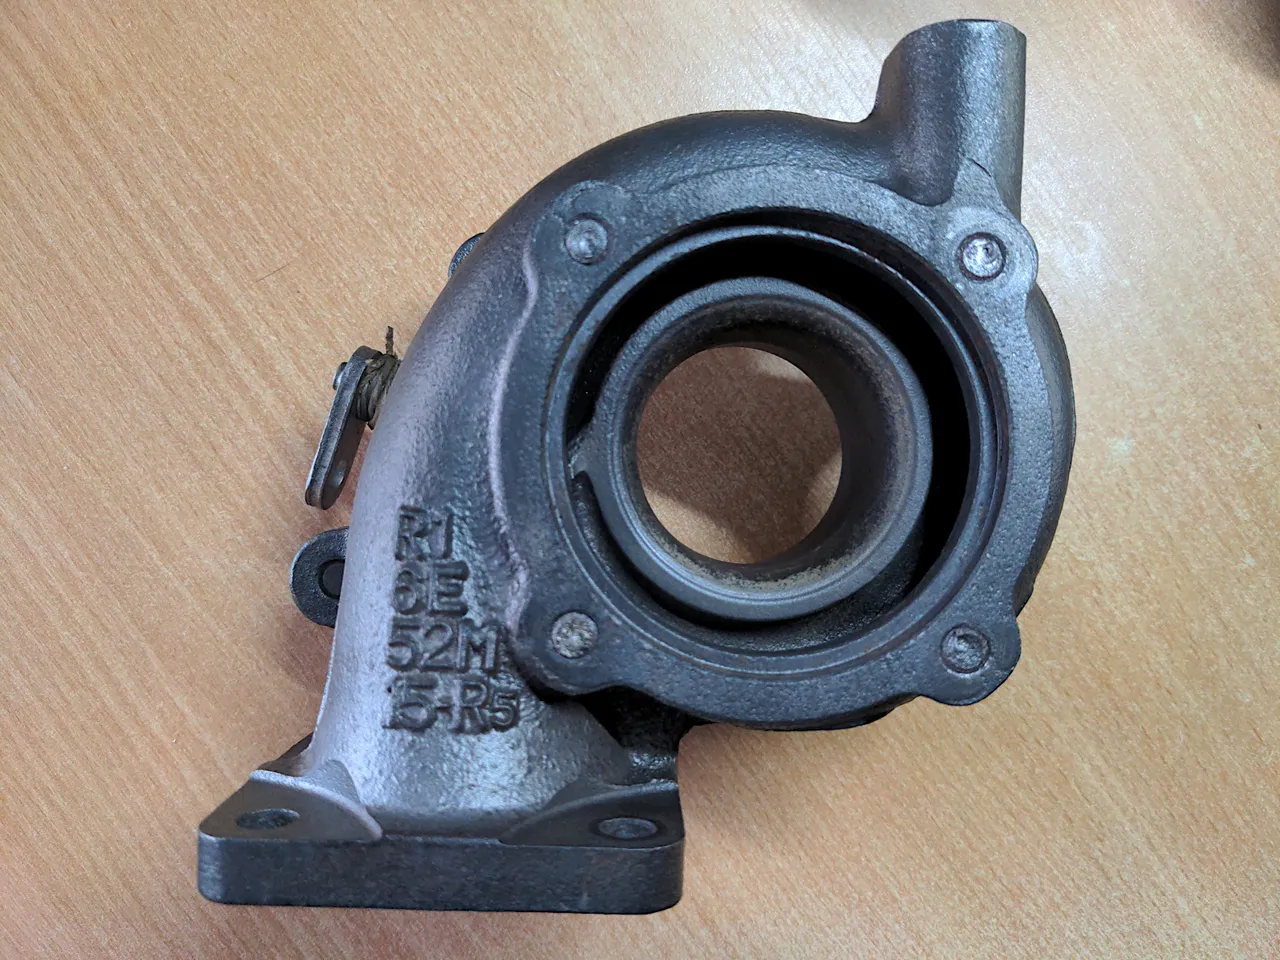 An IHI VJ9 turbo stripped down to its turbine housing - it is about a third of its full size with everything else removed. The remnants of four sheared bolts are visible.